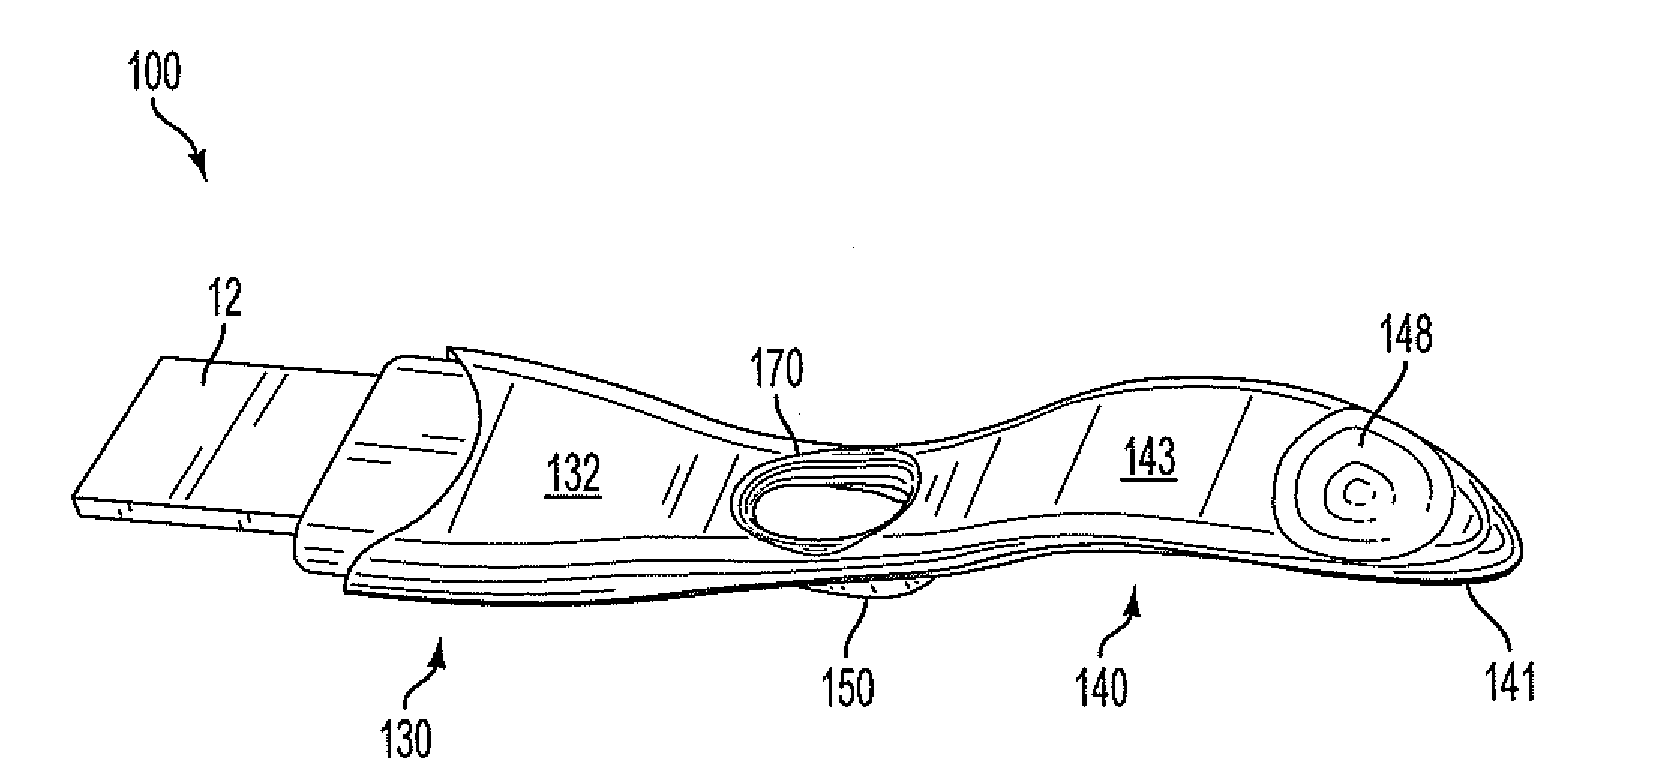 Diagnostic test device with improved structure